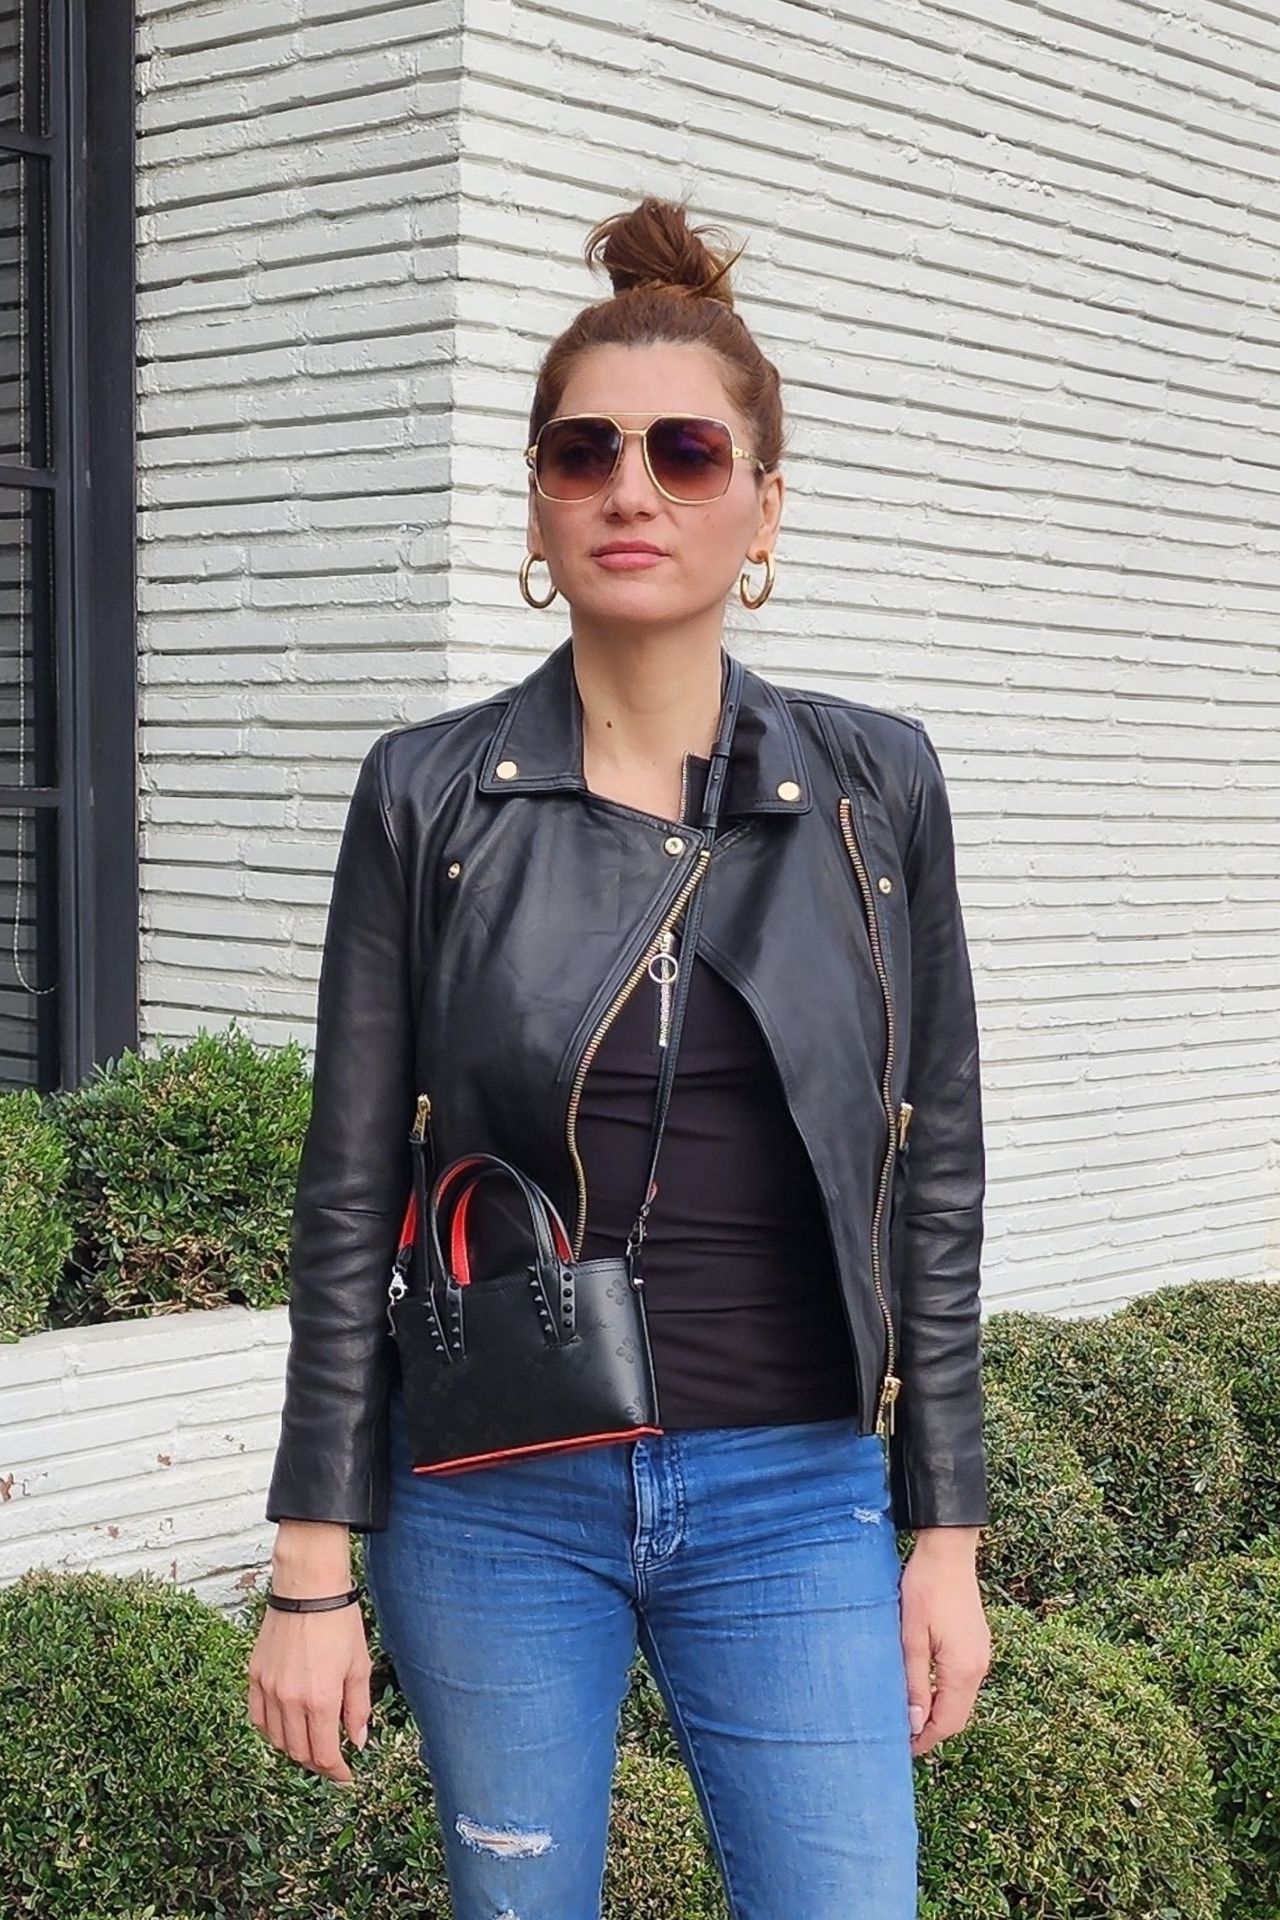 Blanca Blanco in black leather jacket at Gracias Madre 1